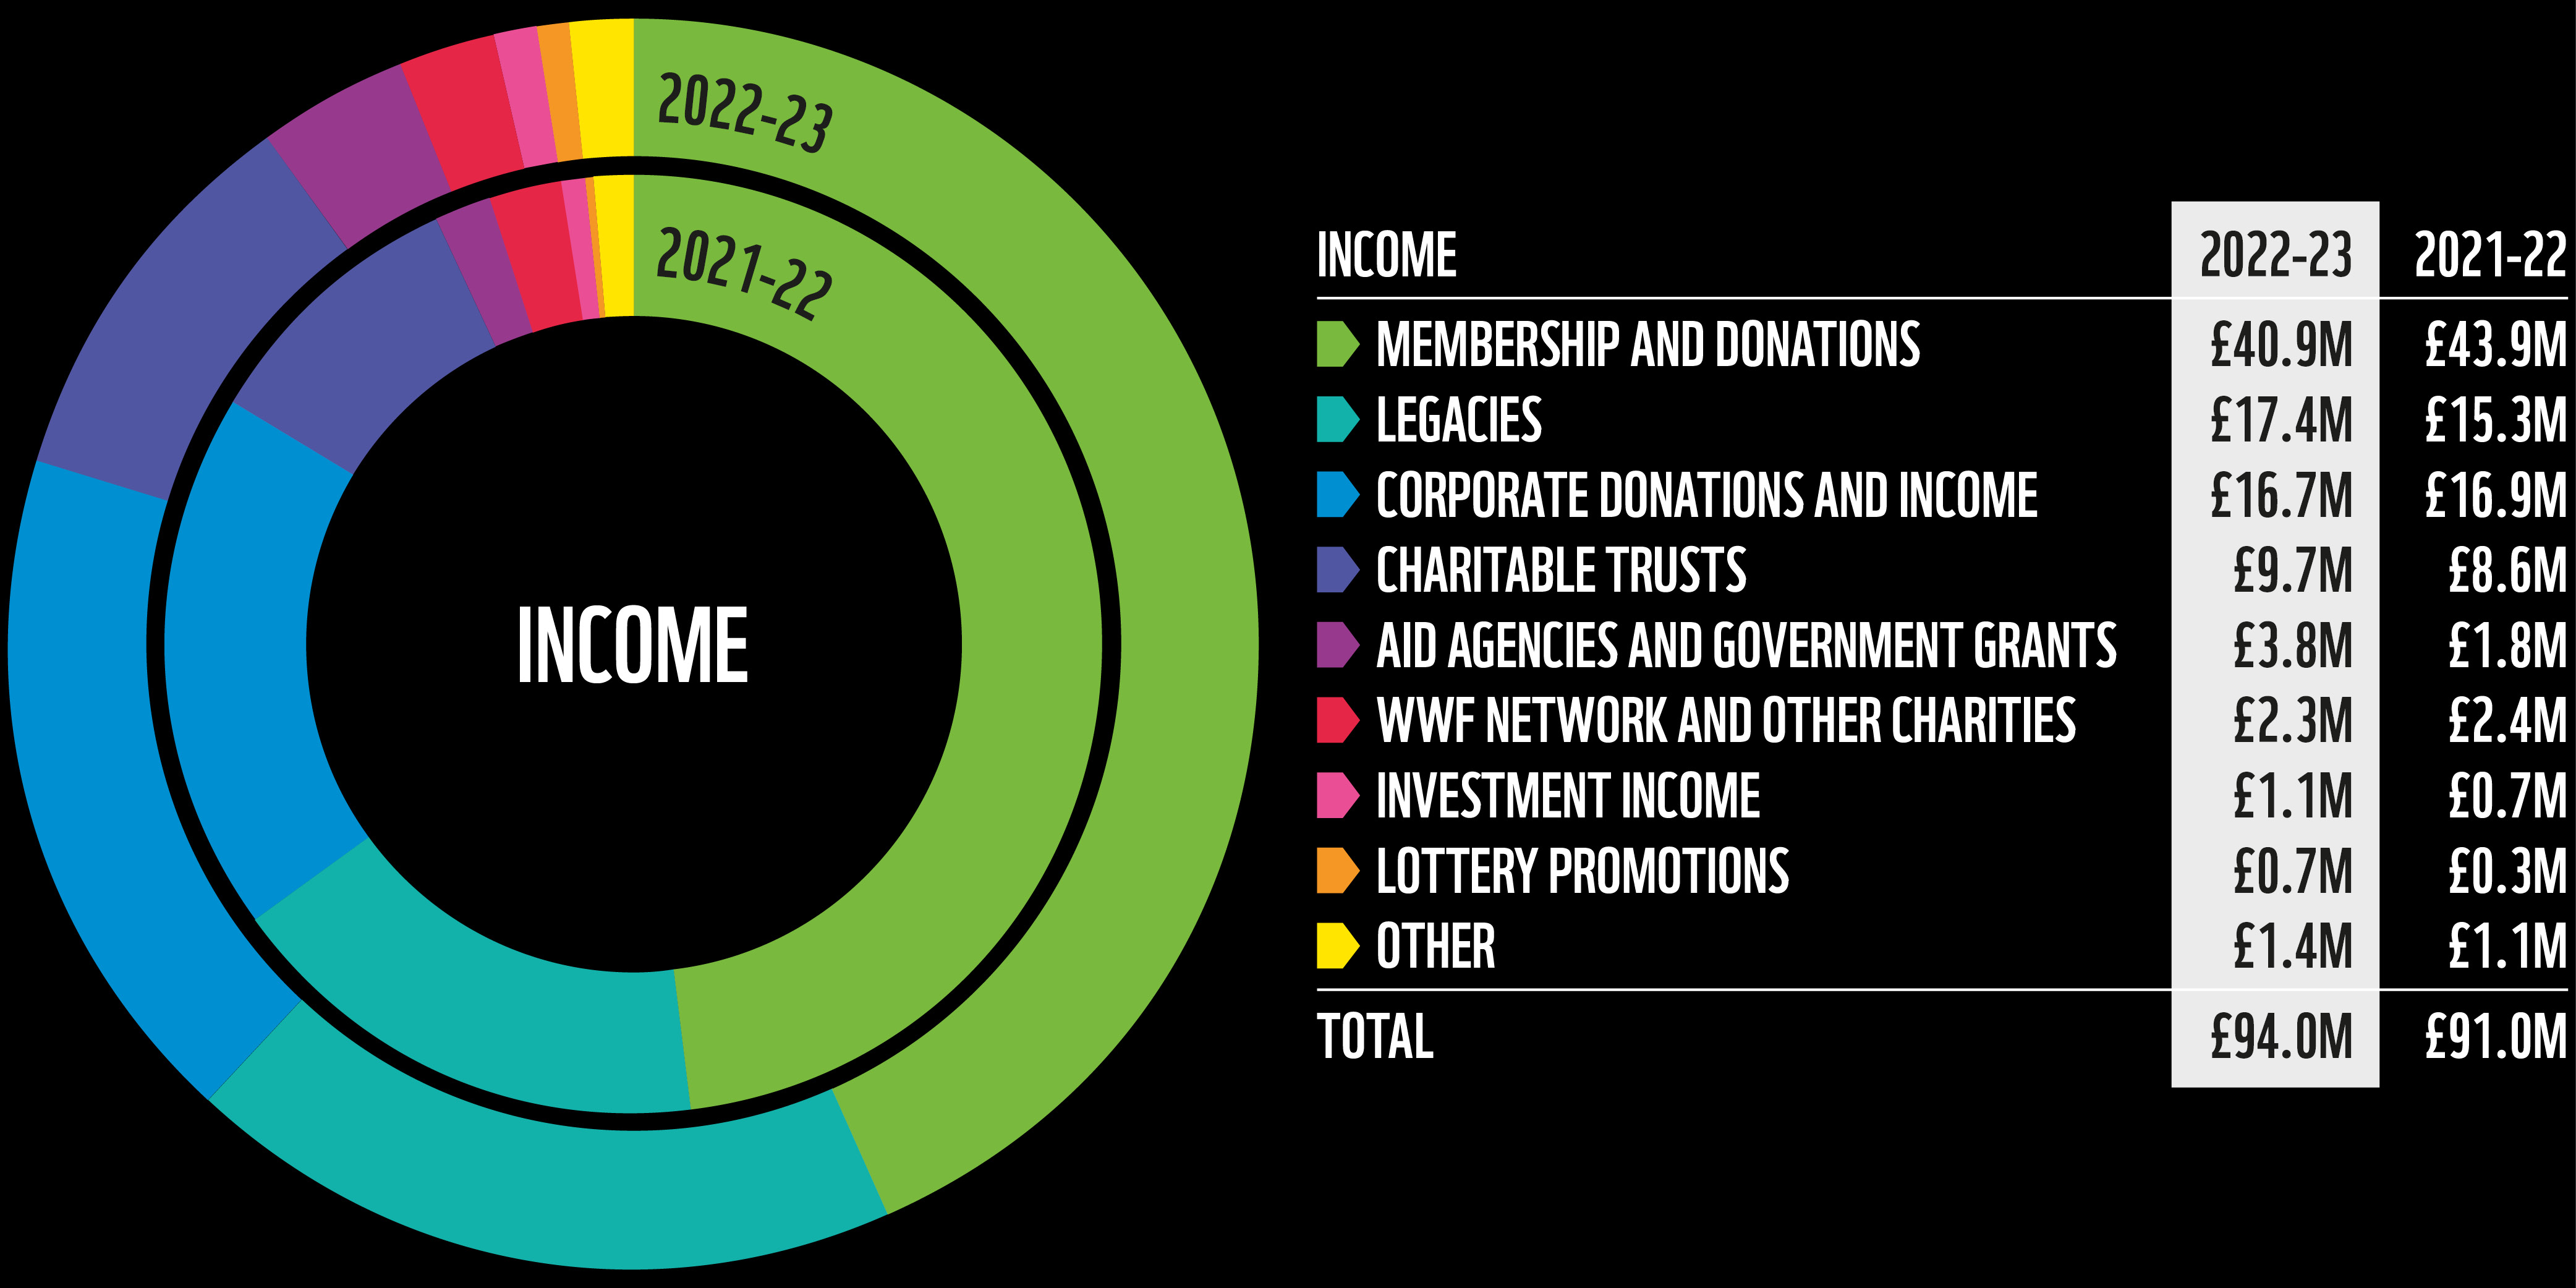 Pie chart of WWF-UKs income 2022-23. Membership and donations £40.9m, Legacies £17.4m, Corporate donations and income 16.7m, Charitable trusts £9.7m, Aid agencies and Government grants £3.8m, WWF Network and other charities £2.3m, Investment income £1.1m, Lottery promotions £0.7m, Other £1.4m, Total £94.0m.